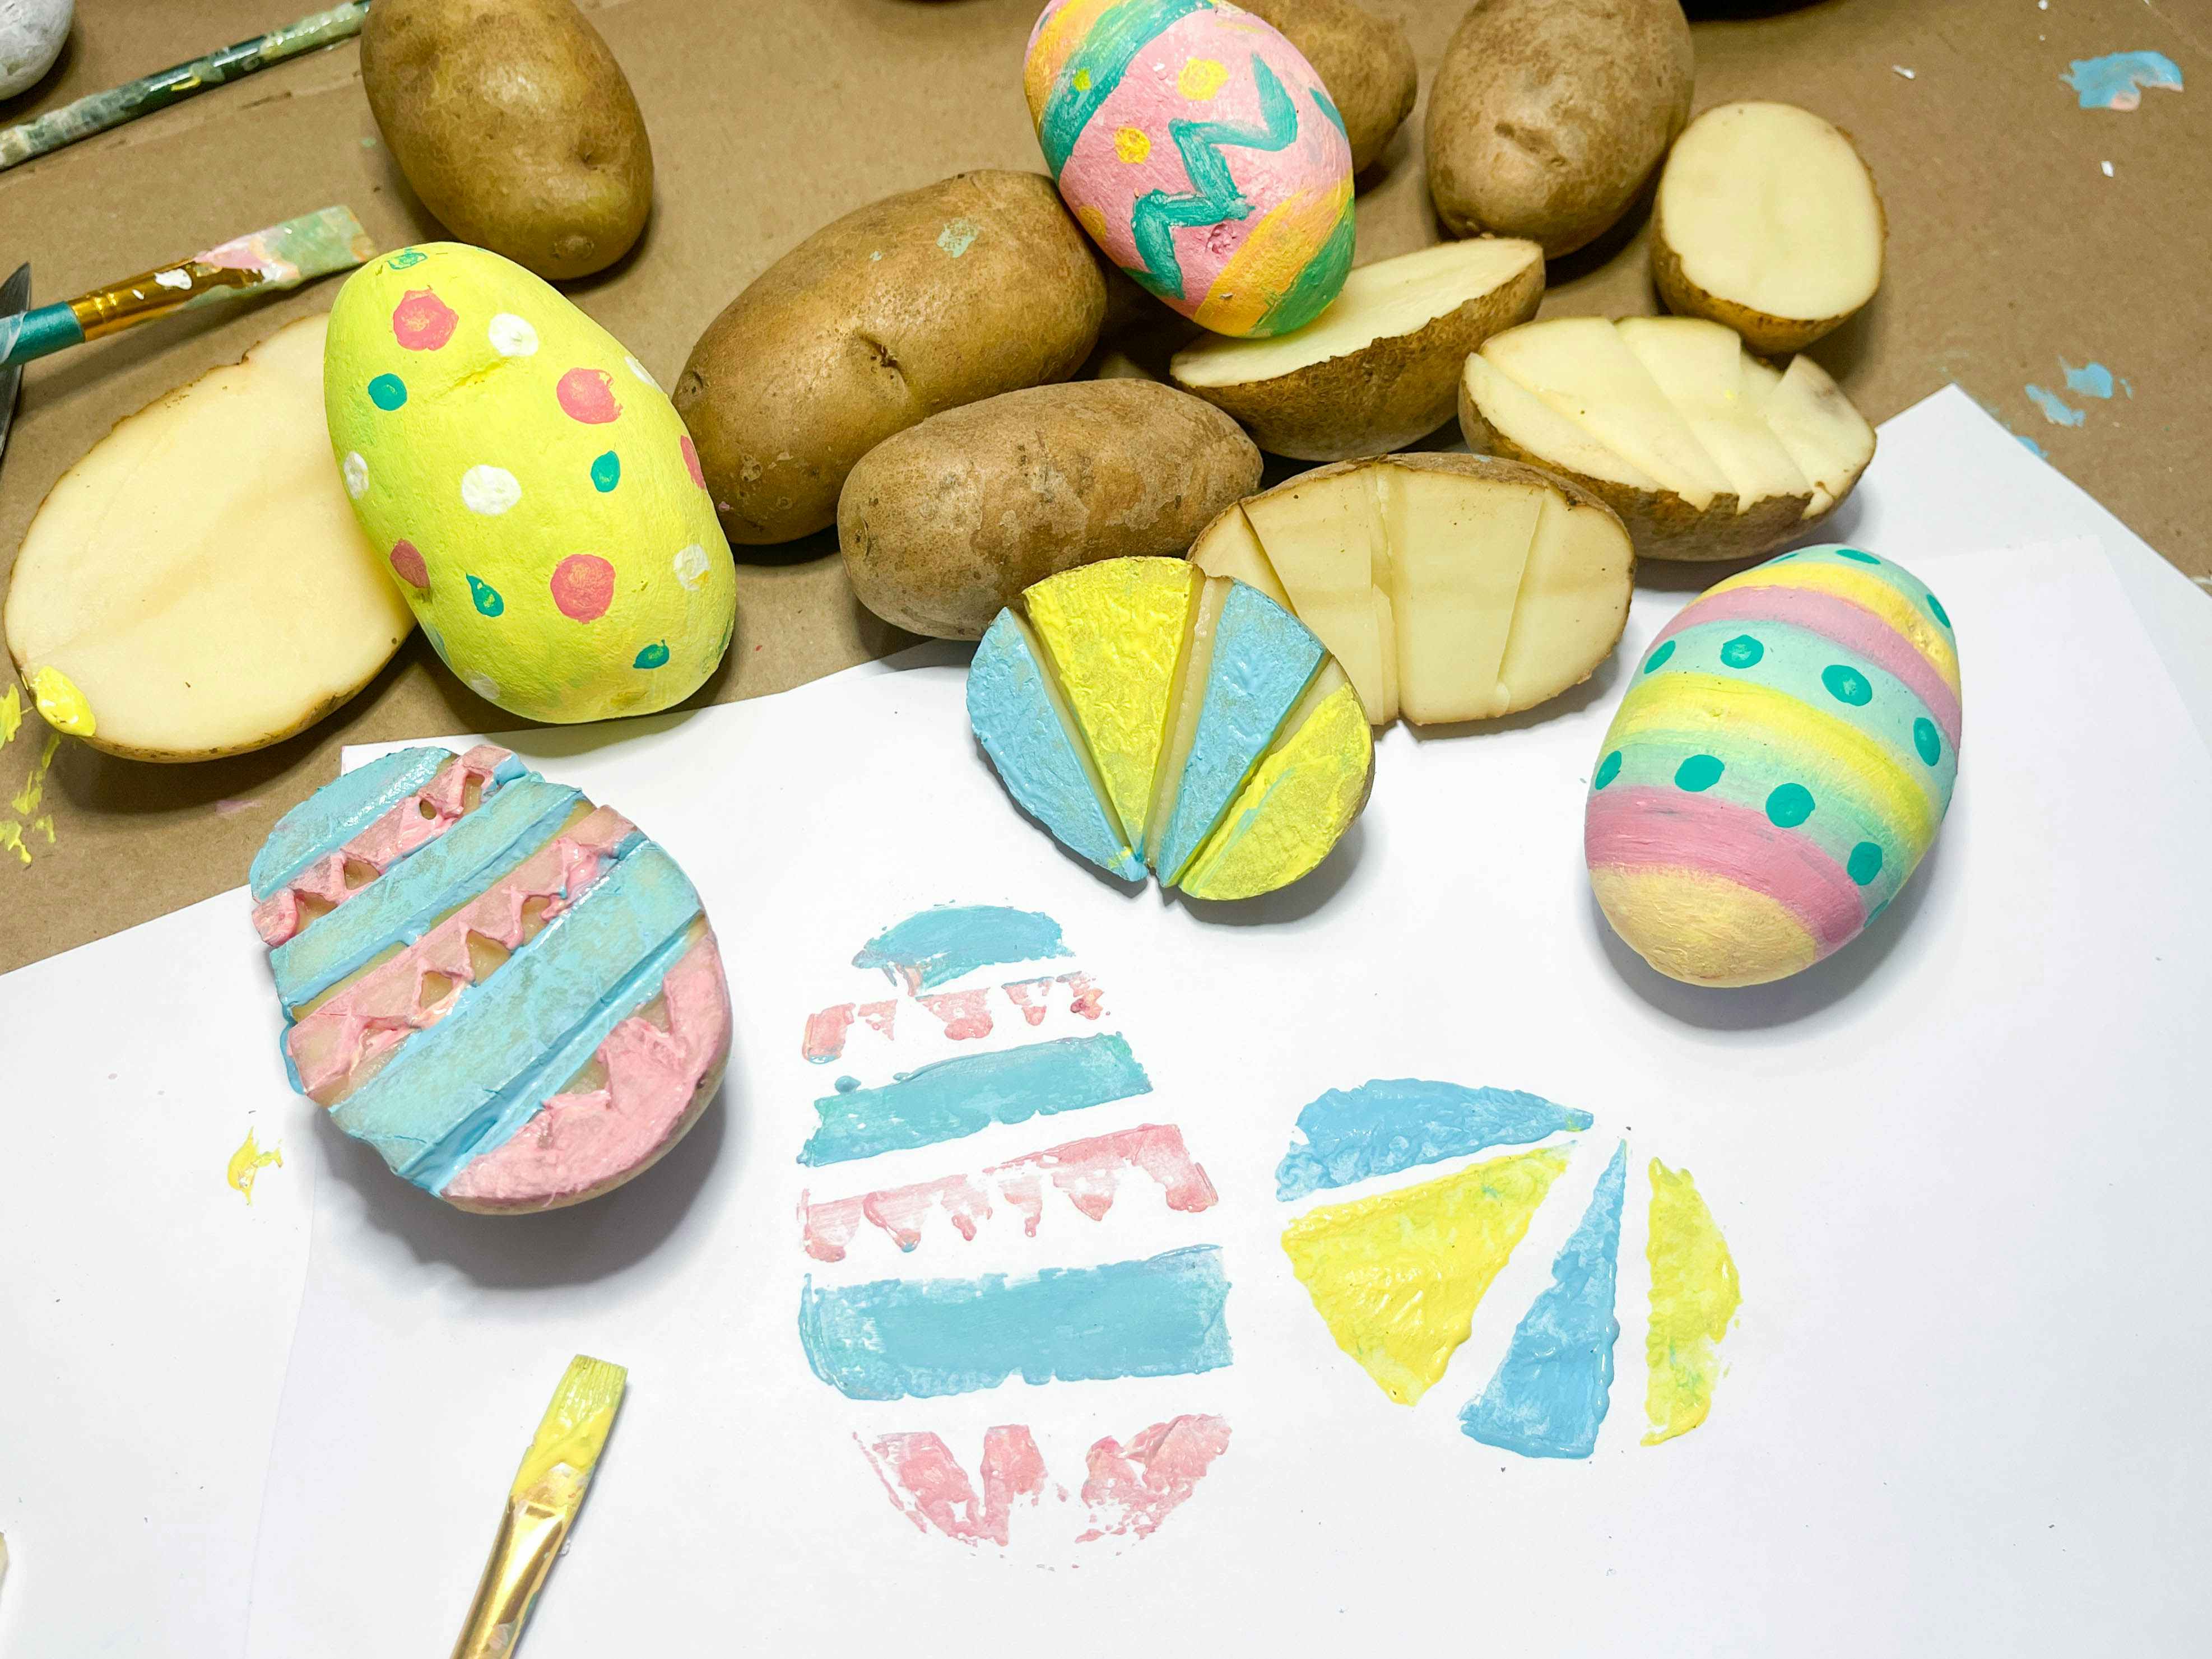 a ground of painted potato stamps and painted potatoes next to the stamp imprint on paper with non painted potaotes on table